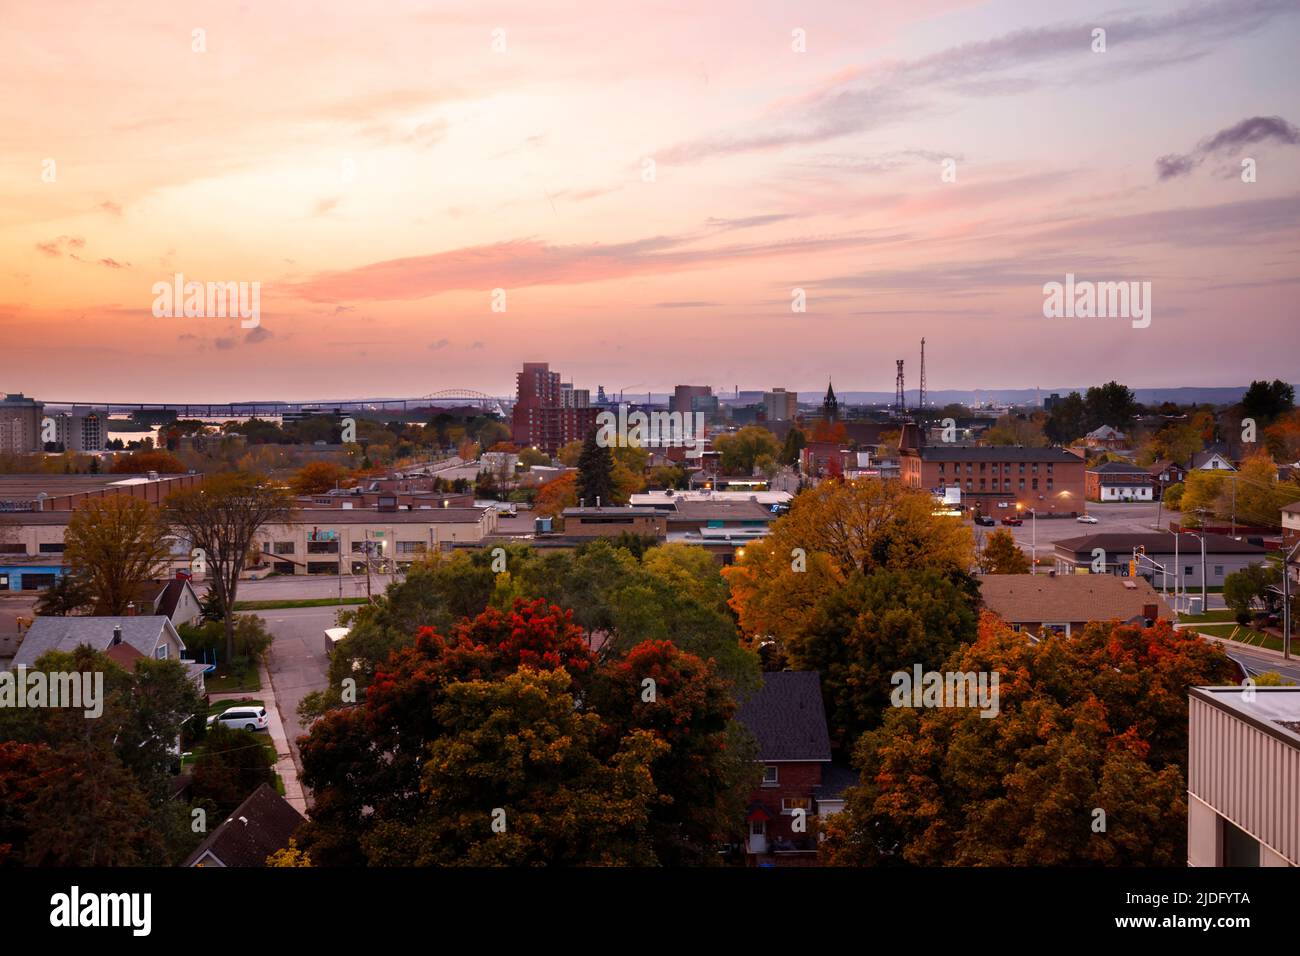 Downtown Sault Ste. Marie at sunset in Ontario, Canada. Stock Photo